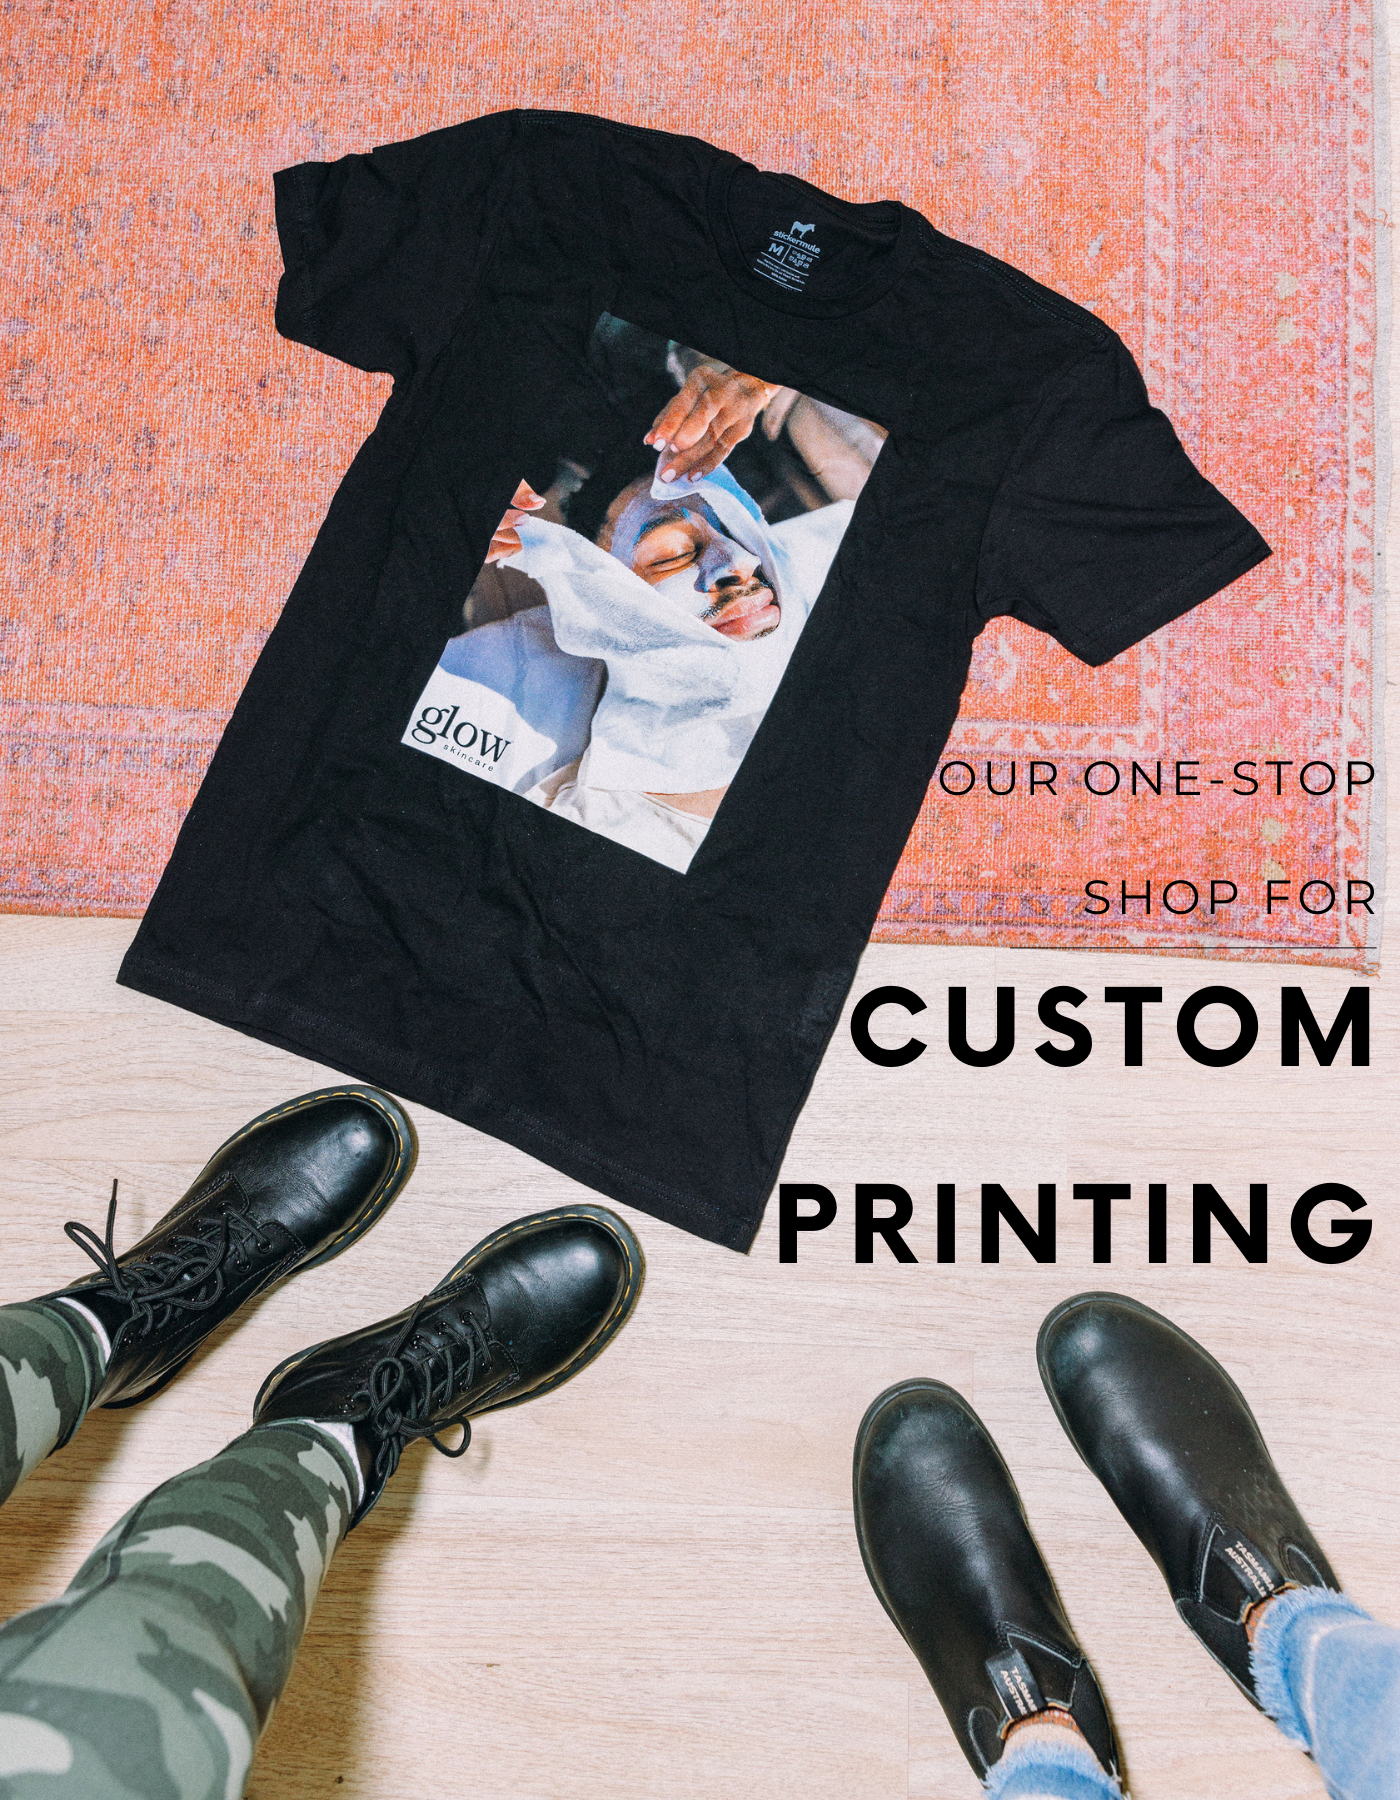 Our One-Stop Shop for Custom Printing